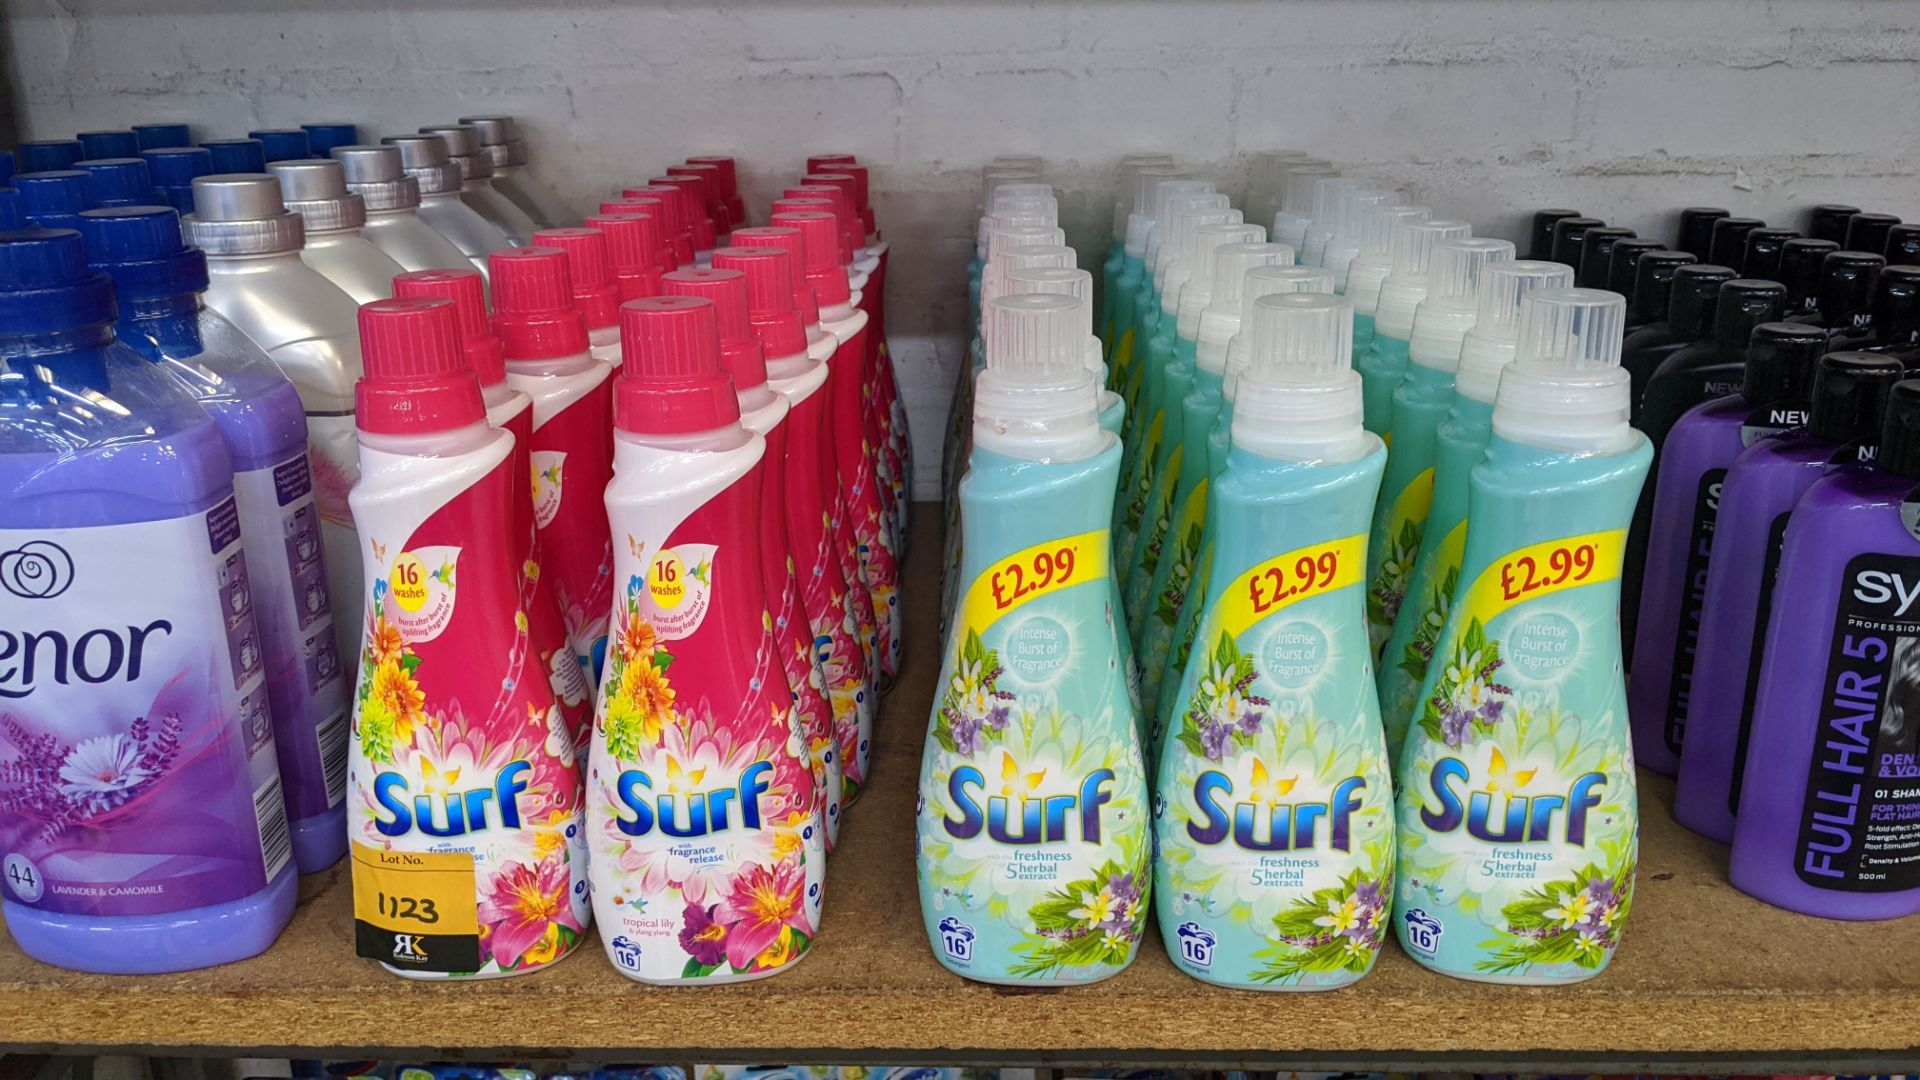 50 off 560ml bottles of Surf in assorted scents. IMPORTANT – DO NOT BID BEFORE READING THE IMPORTANT